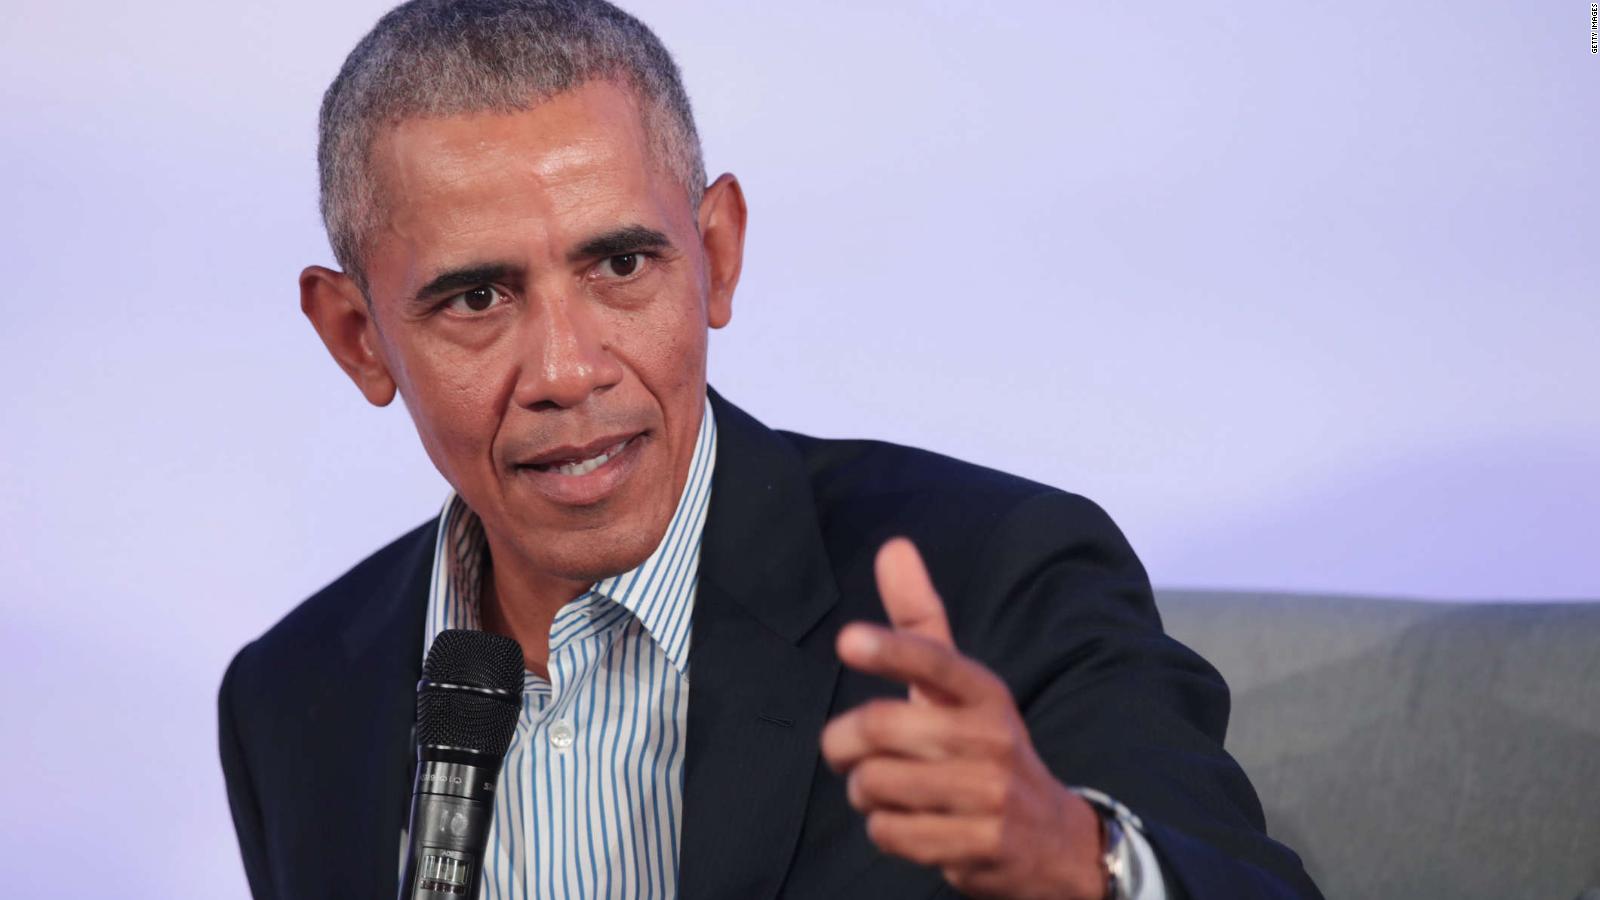 Obama’s strong message on the Israeli-Palestinian conflict